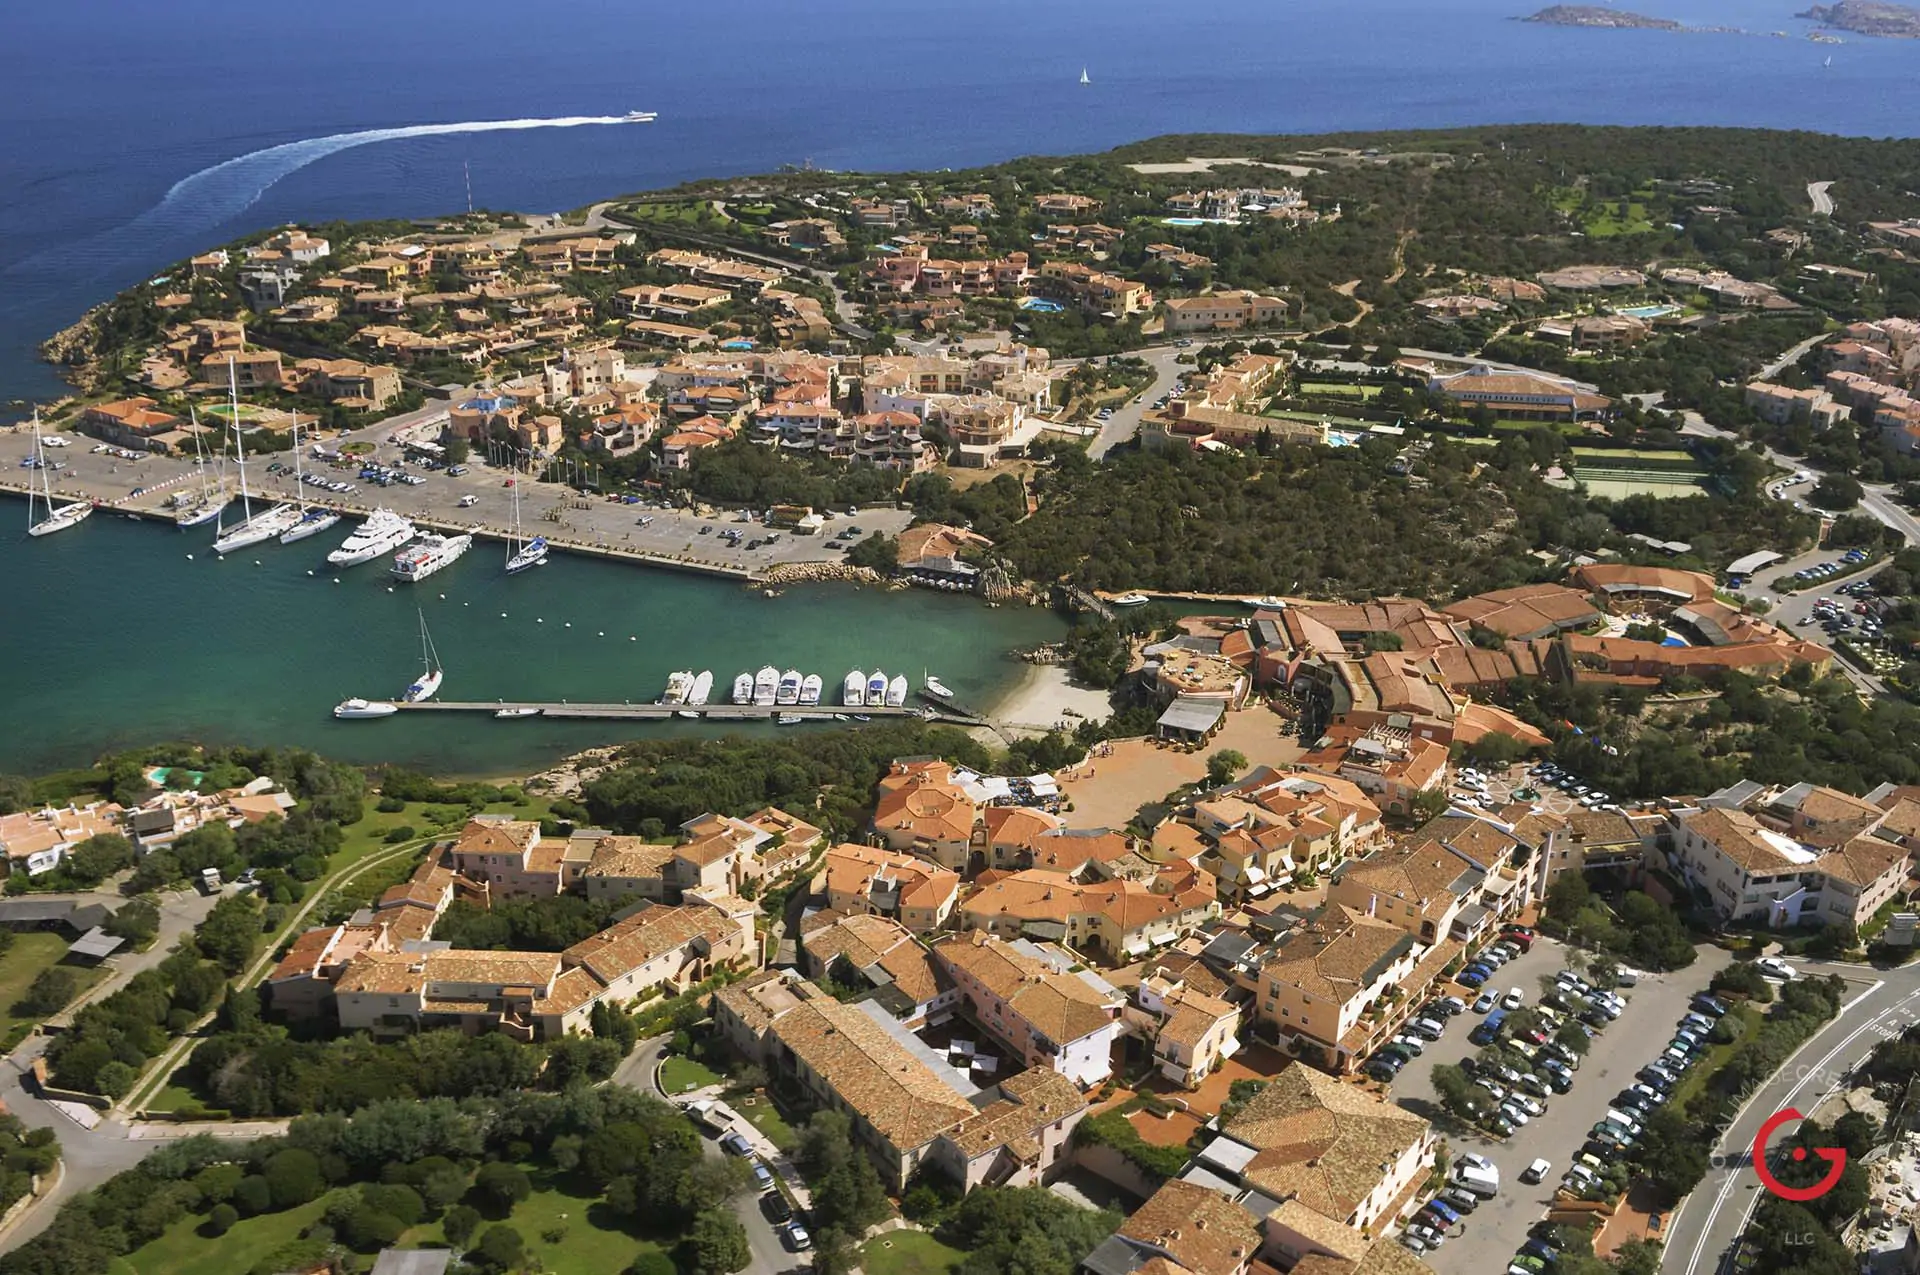 Porto Cervo Aerial View, Costa Smeralda, Italy - Professional Architecture Photographer and Commercial Photography of Buildings